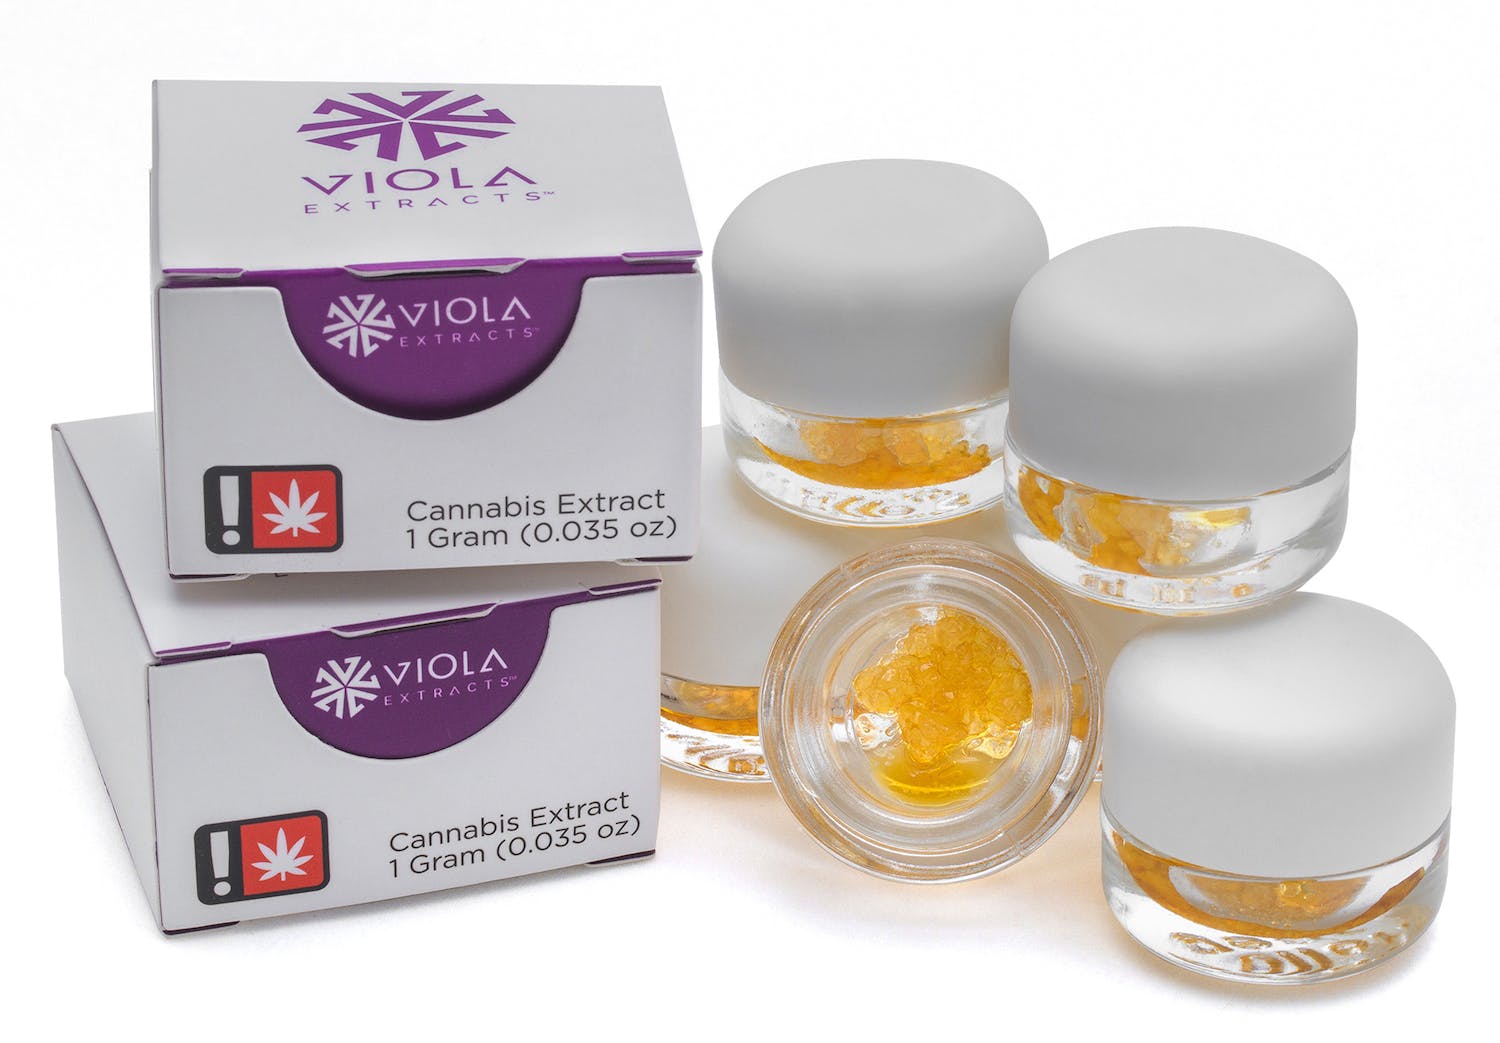 concentrate-viola-extracts-summer-breeze-live-resin-230614